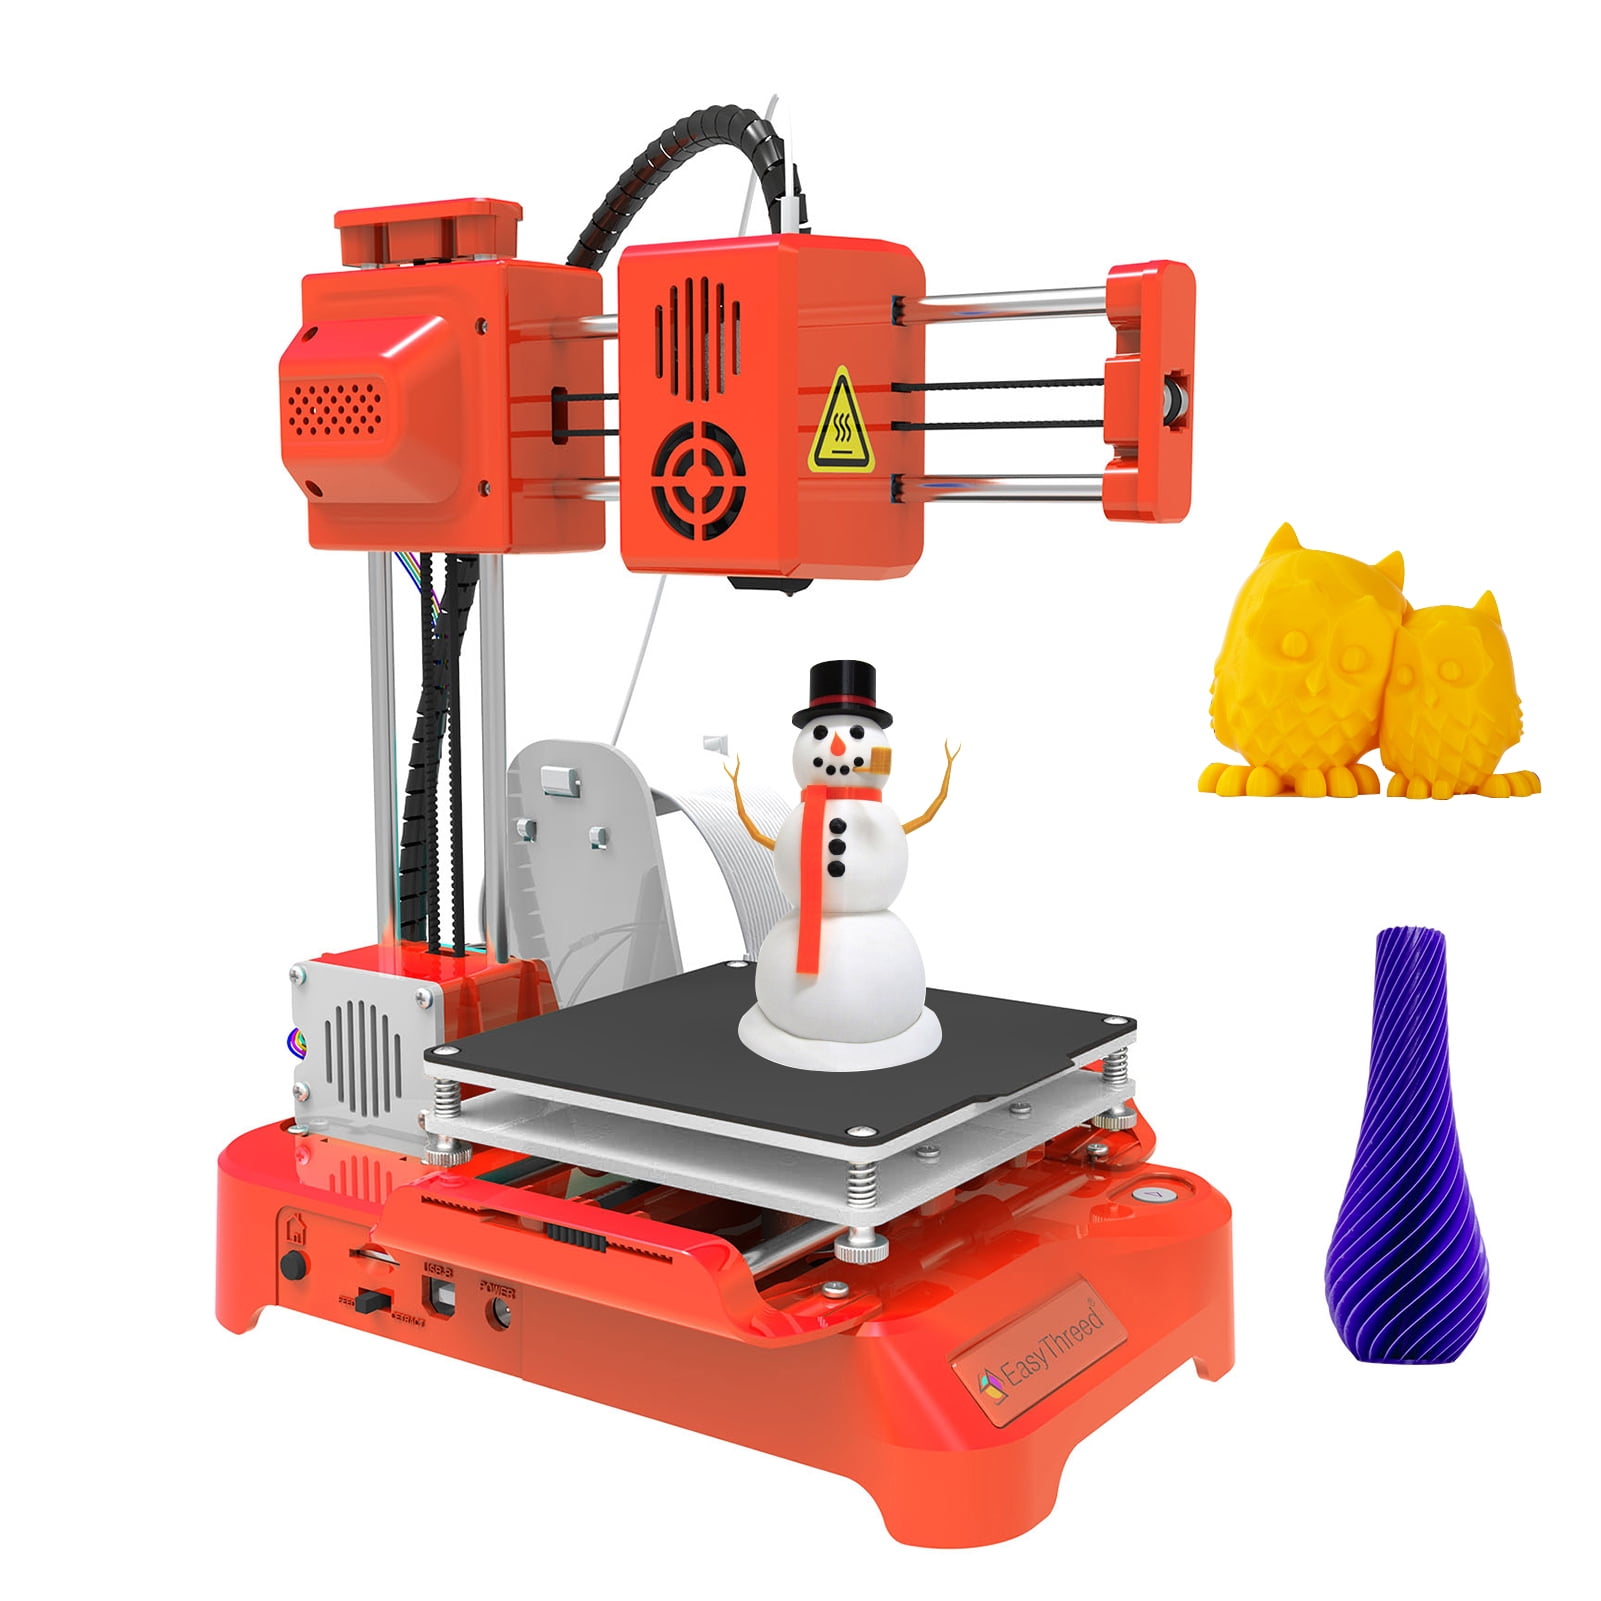 EasyThreed K7 Printer for Kids, Mini 3D Printer No Bed One-Key with TF Card PLA Sample Filament for Beginners Education,100x100x100mm - Walmart.com